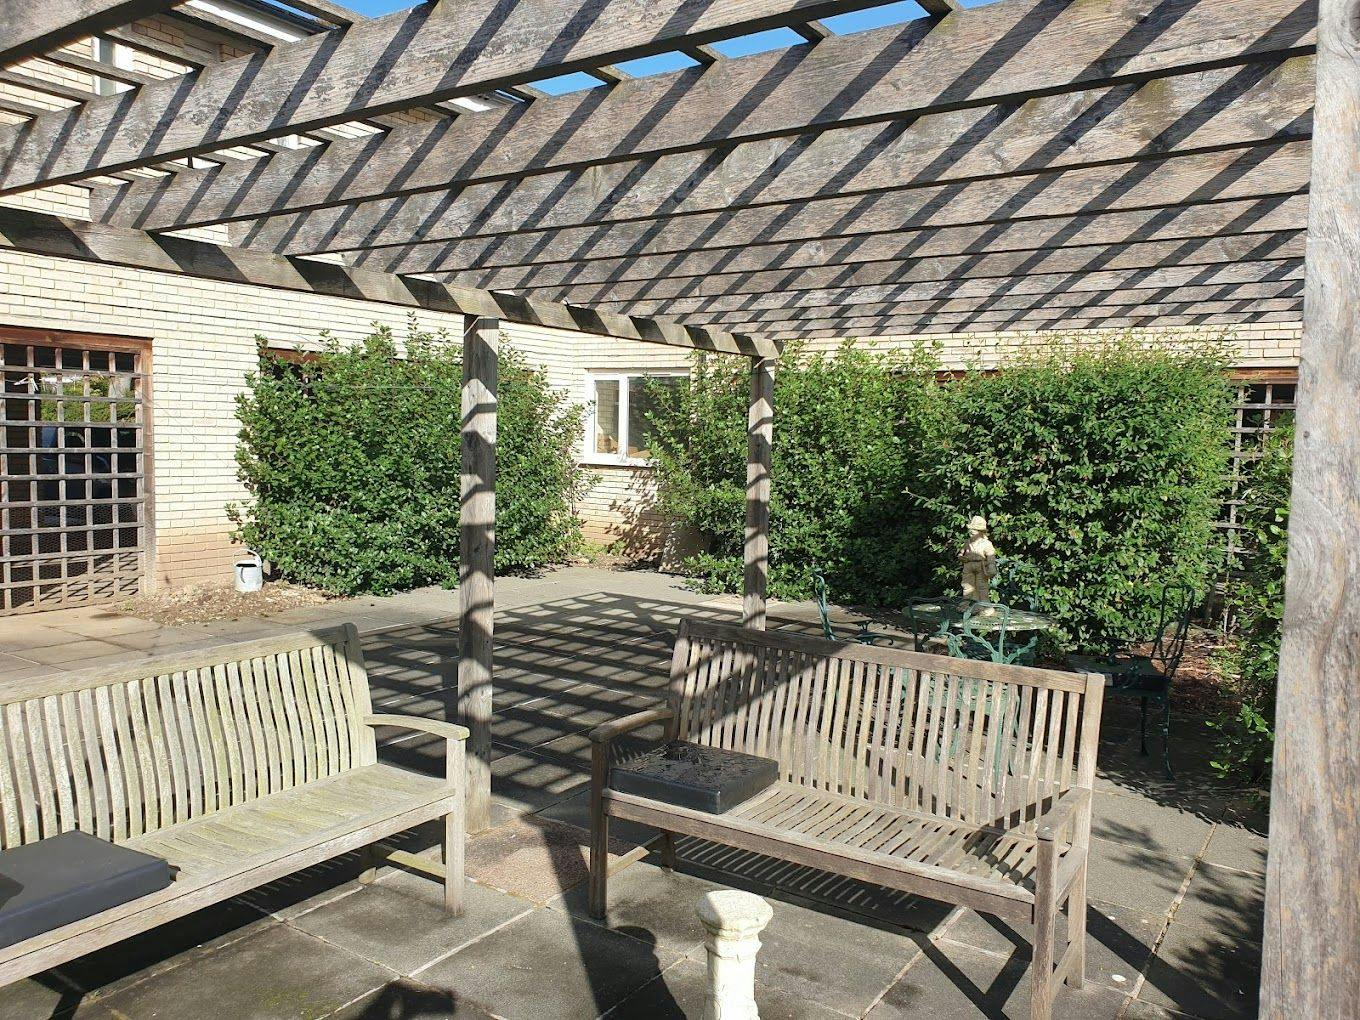 Garden at Arbor Care Home in Leicester, Leicestershire